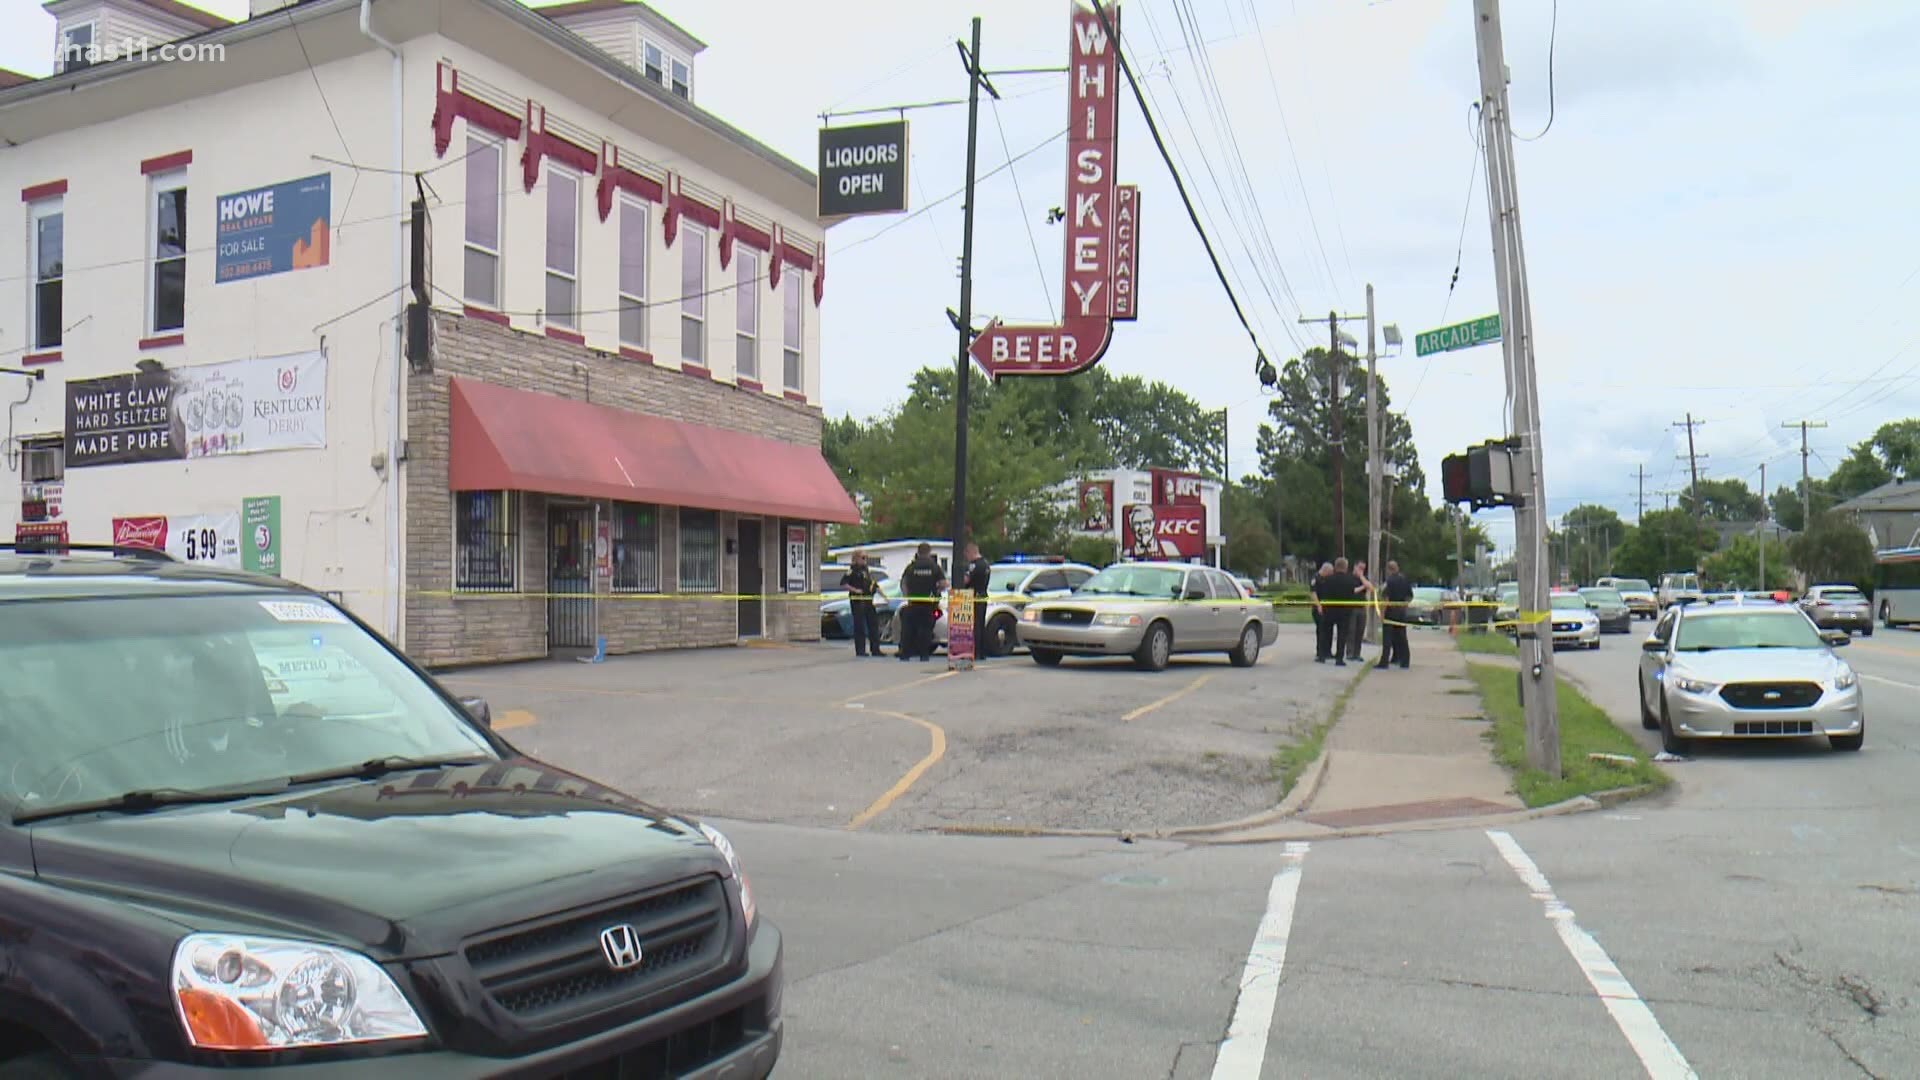 Police said the victim was shot inside the business located on Arcade Avenue and Taylor Boulevard Monday.